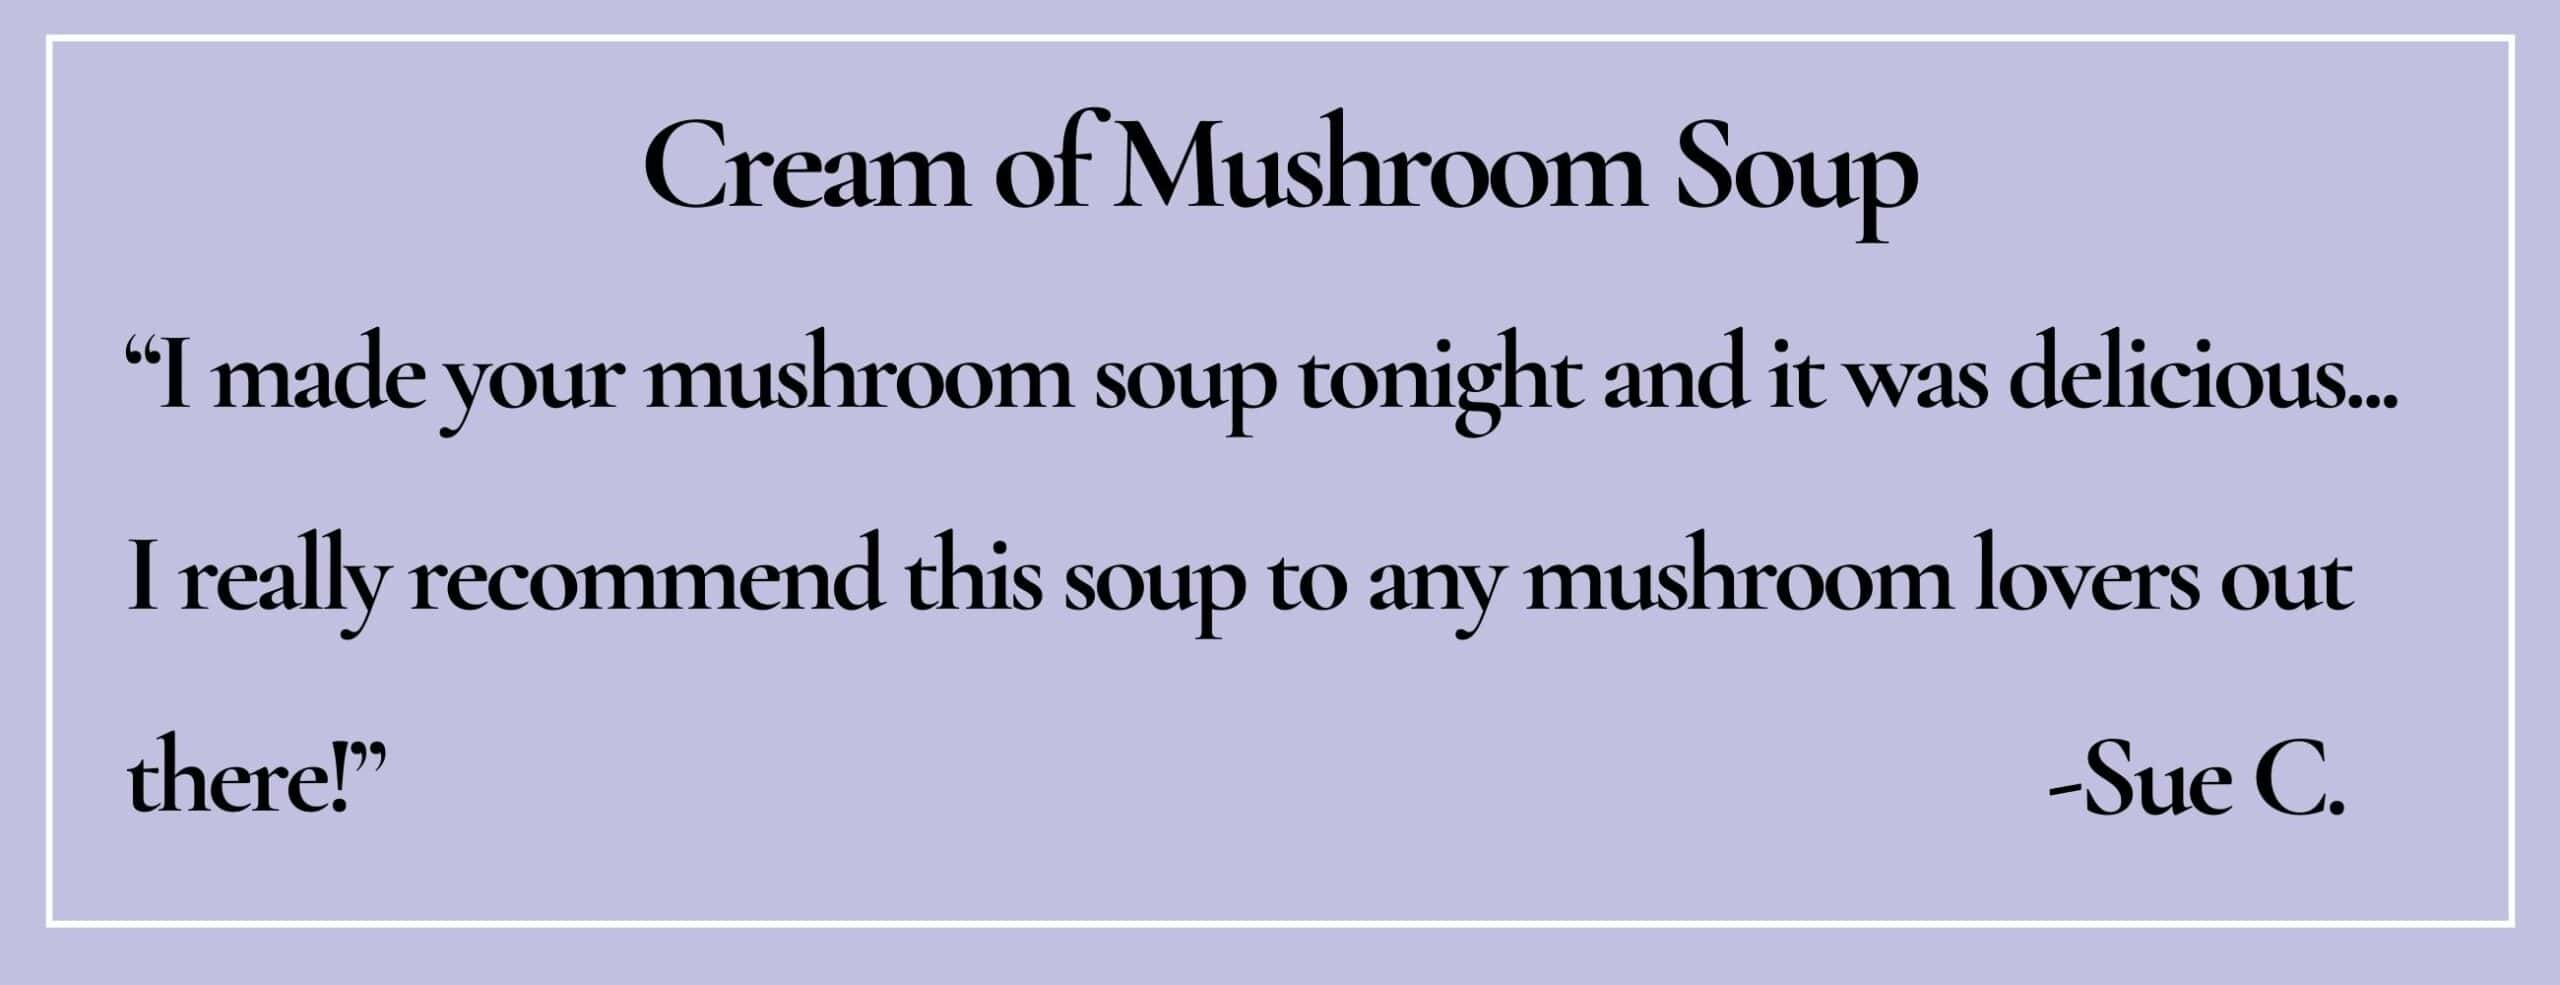 Text box with paraphrase: I made your mushroom soup tonight and it was delicious. -Sue C